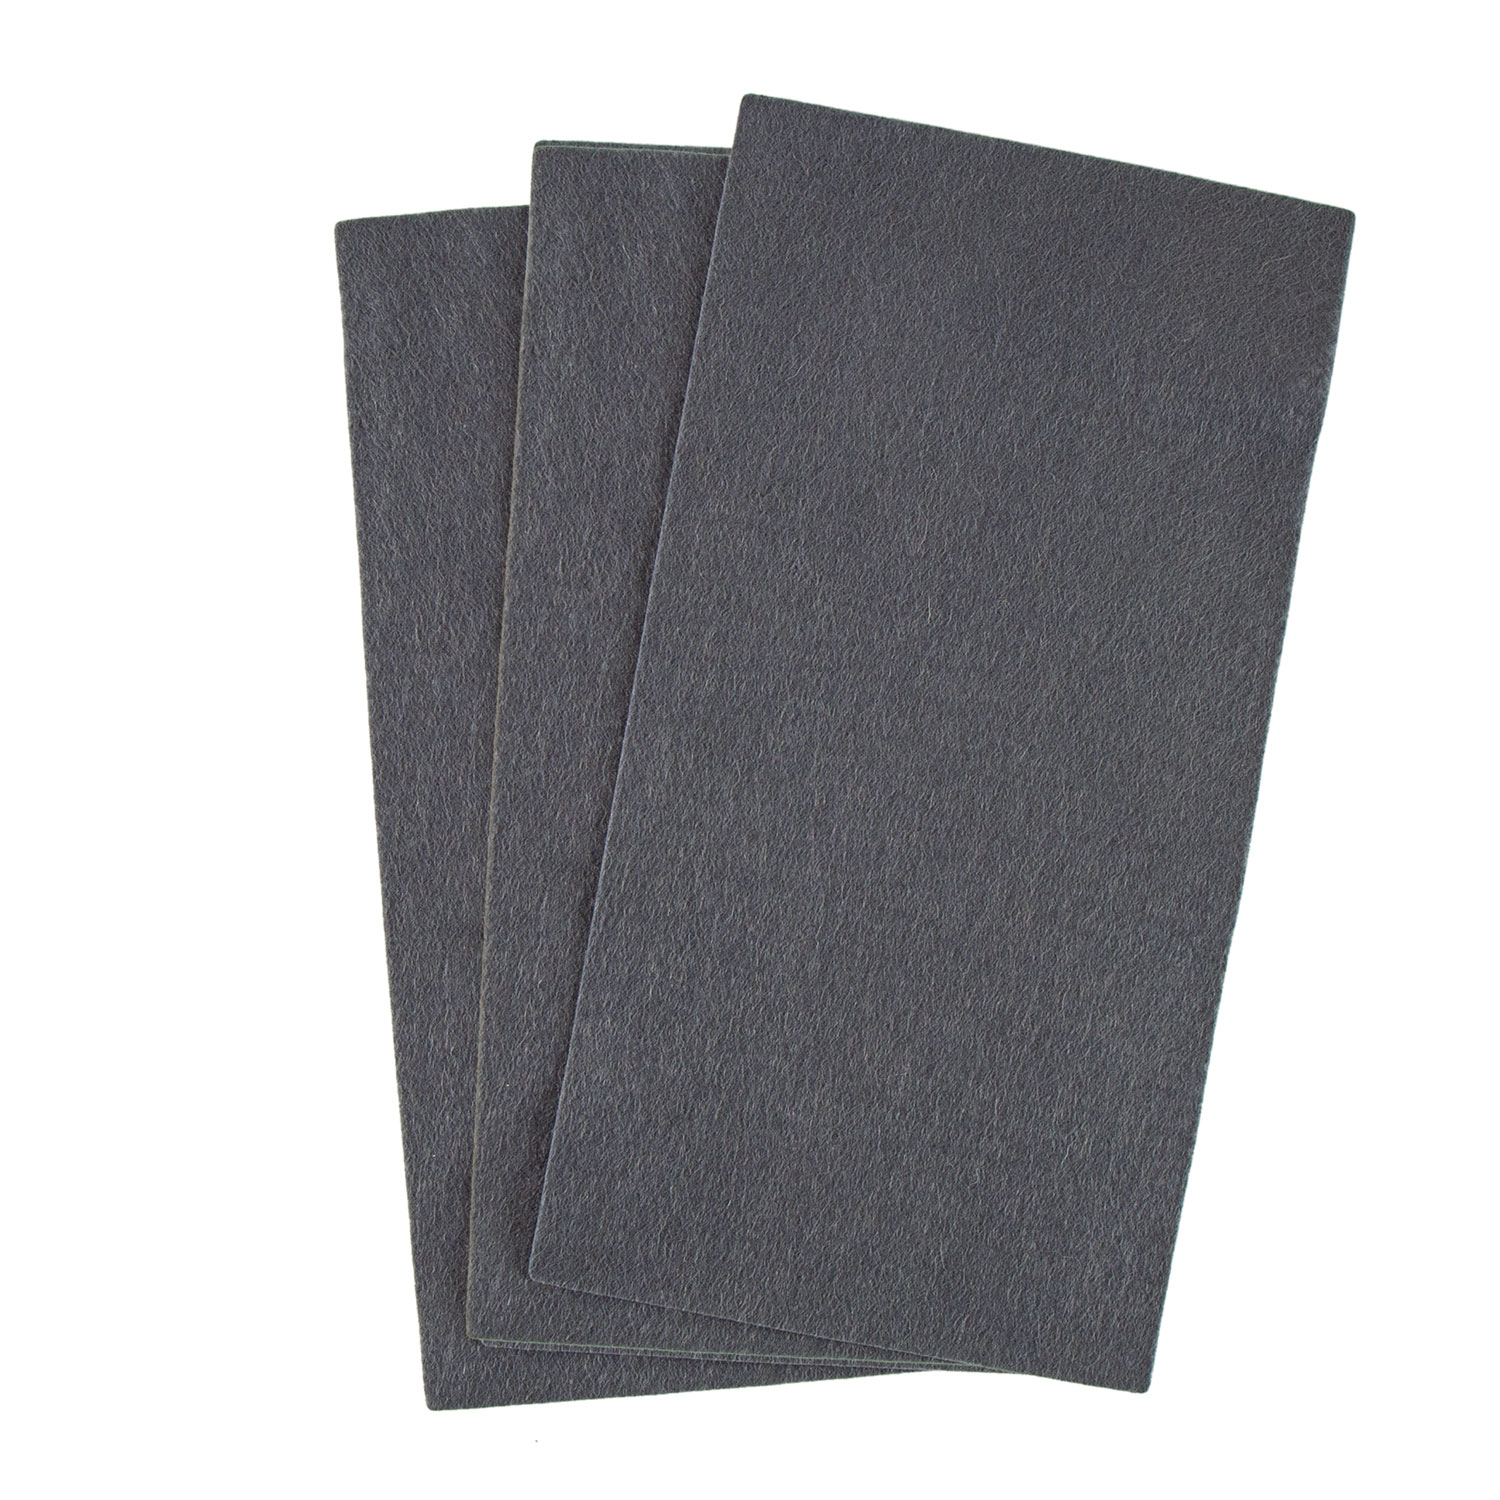 Felt by Clarity Mug Rug Backers Pack of 3 x 11.5x6" Non Adhesive Backed Felt Pick N Mix - Pick any 2  - Just Grey